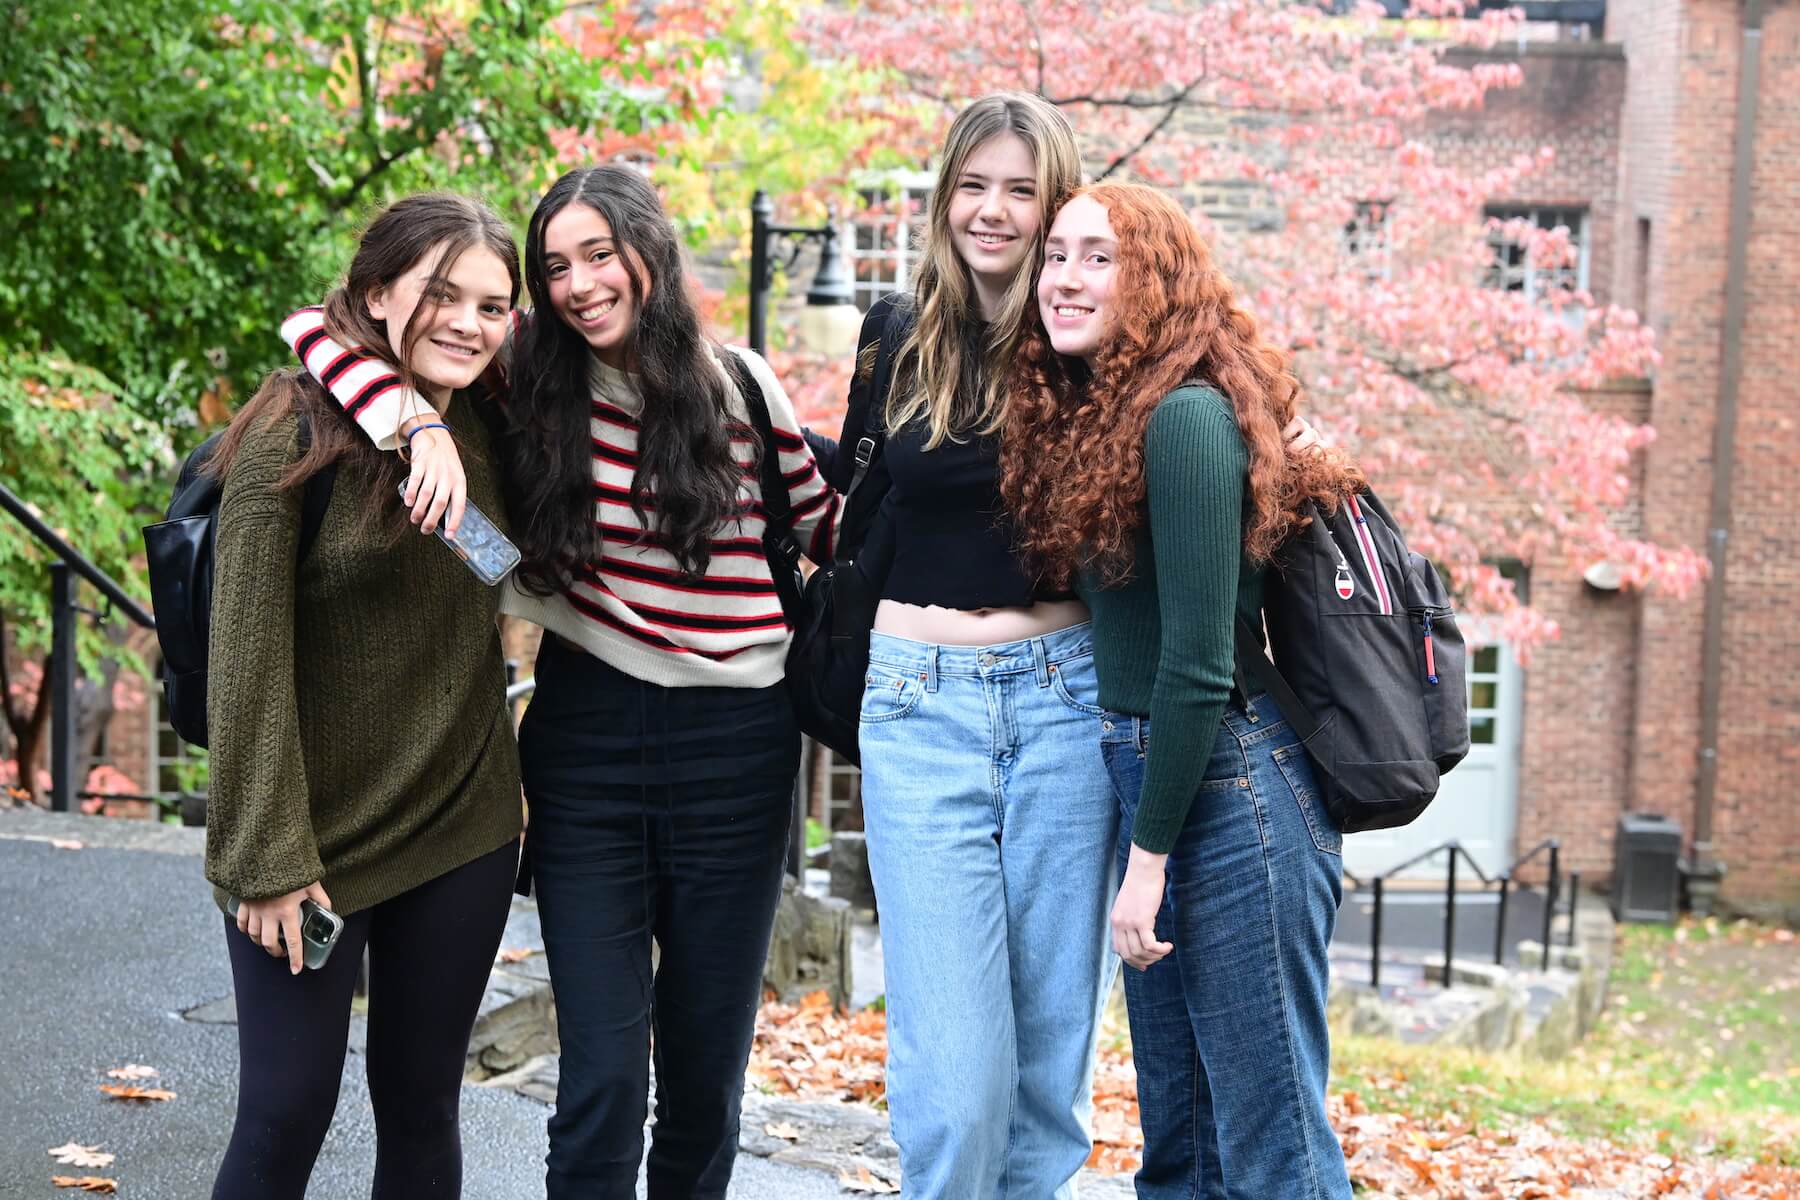 Ethical Culture Fieldston School Upper School students stand together in arms on campus quad